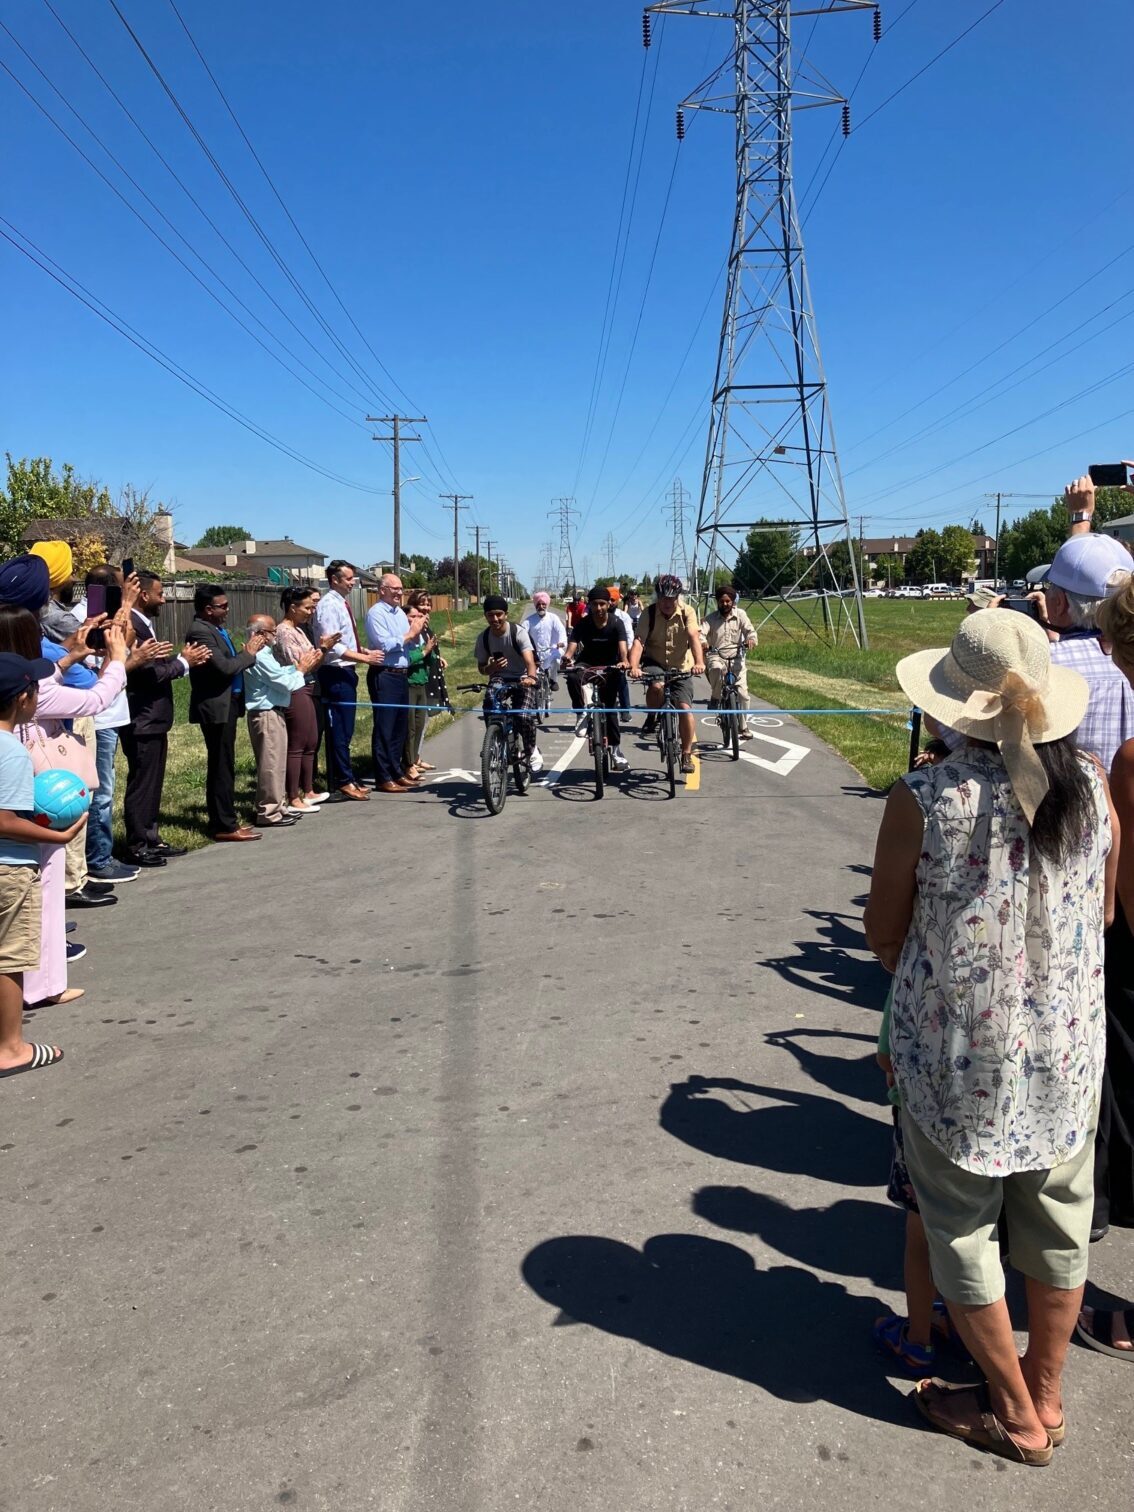 Featured Image for “City of Winnipeg and partners celebrate official opening of the Northwest Hydro Corridor Multi-Use Path”